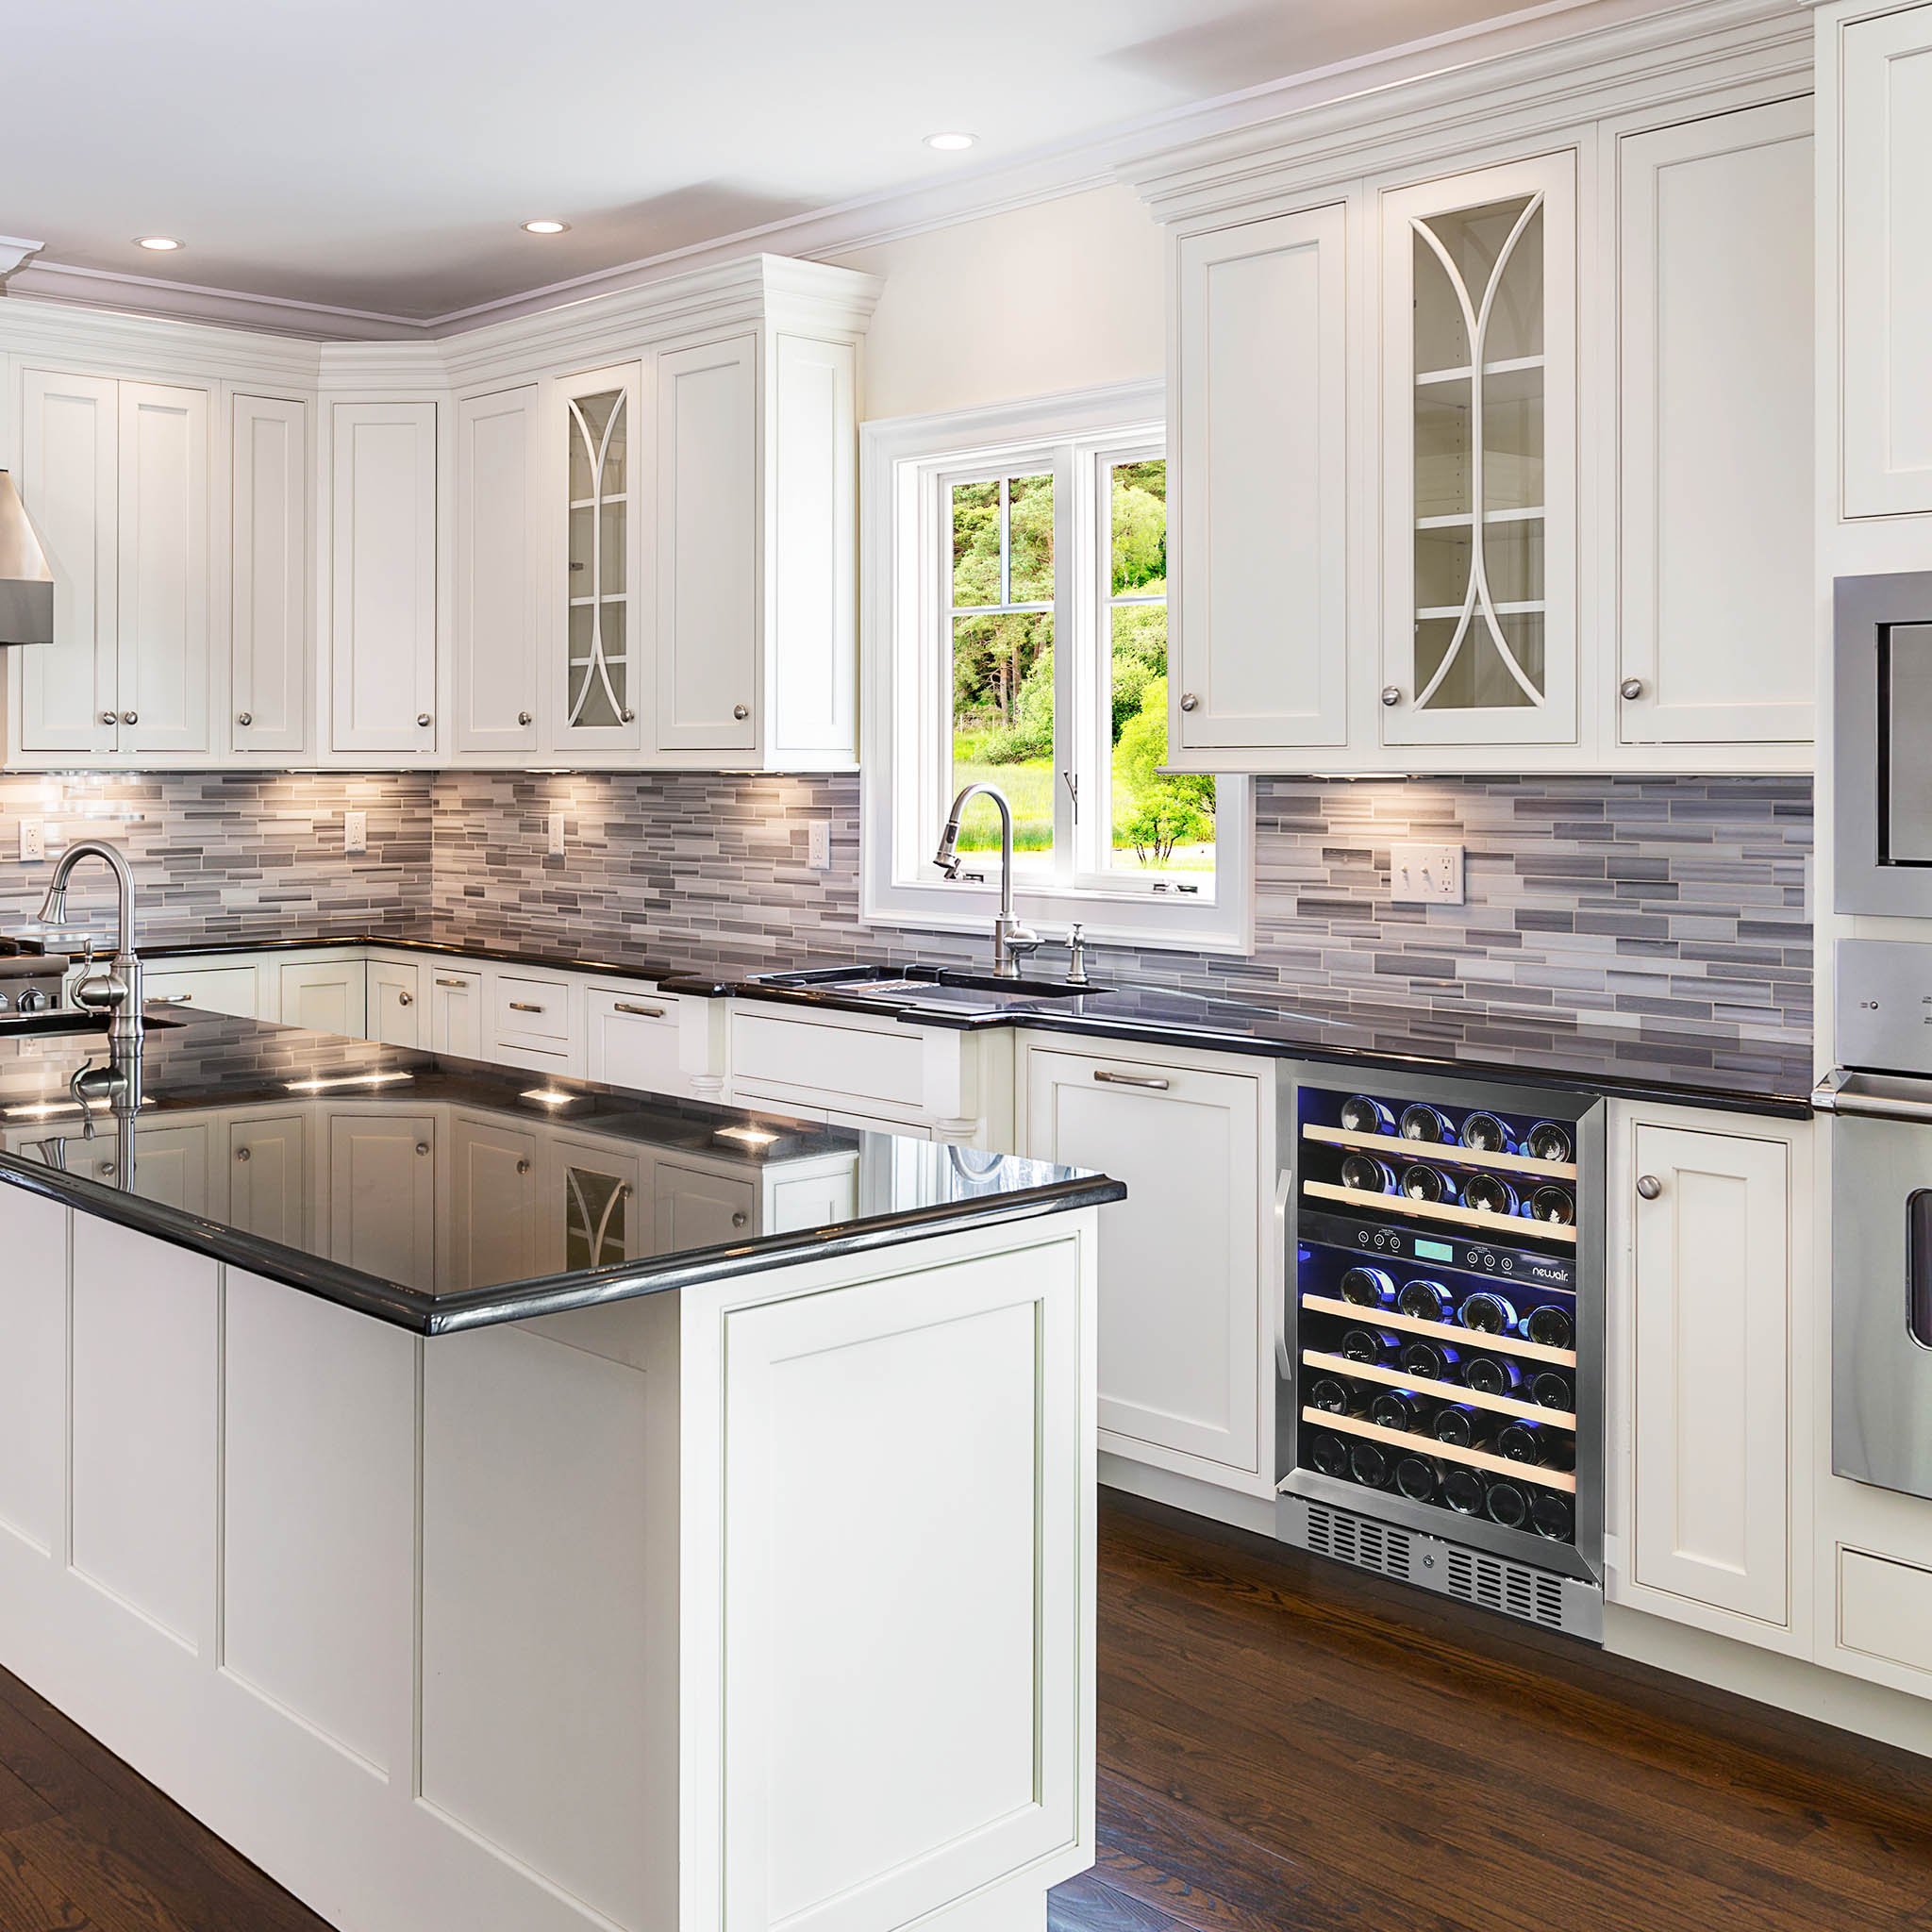 Remodeling Your Kitchen with Major Appliances in Mind